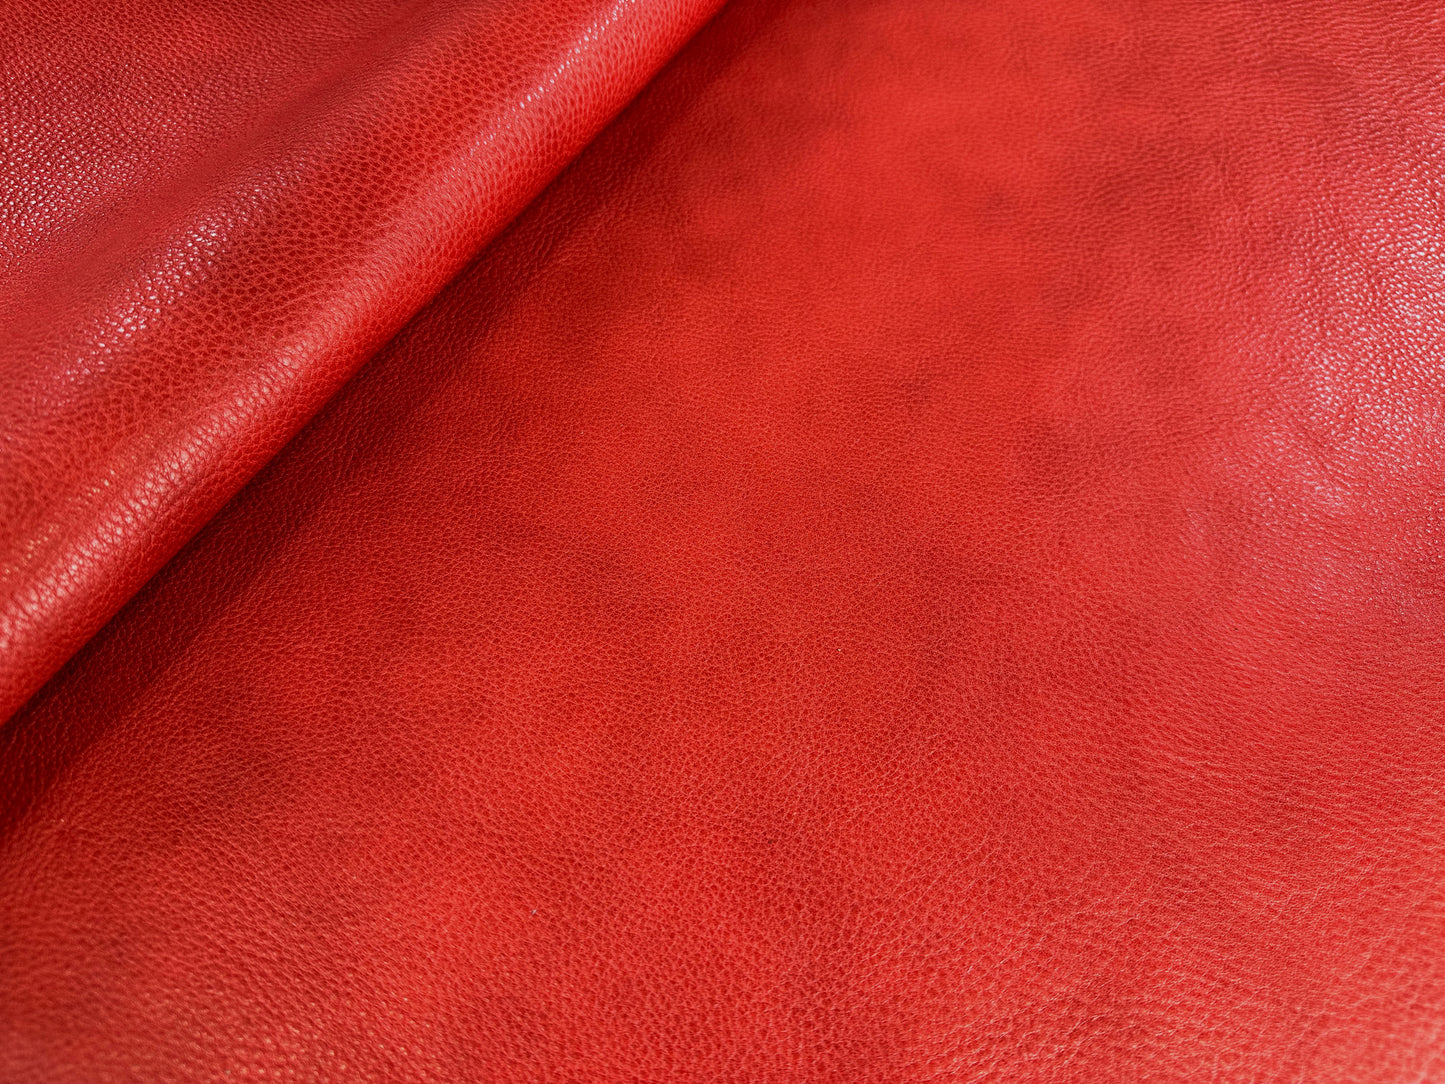 MW Natural Tanned Shrink Leather #5 Red